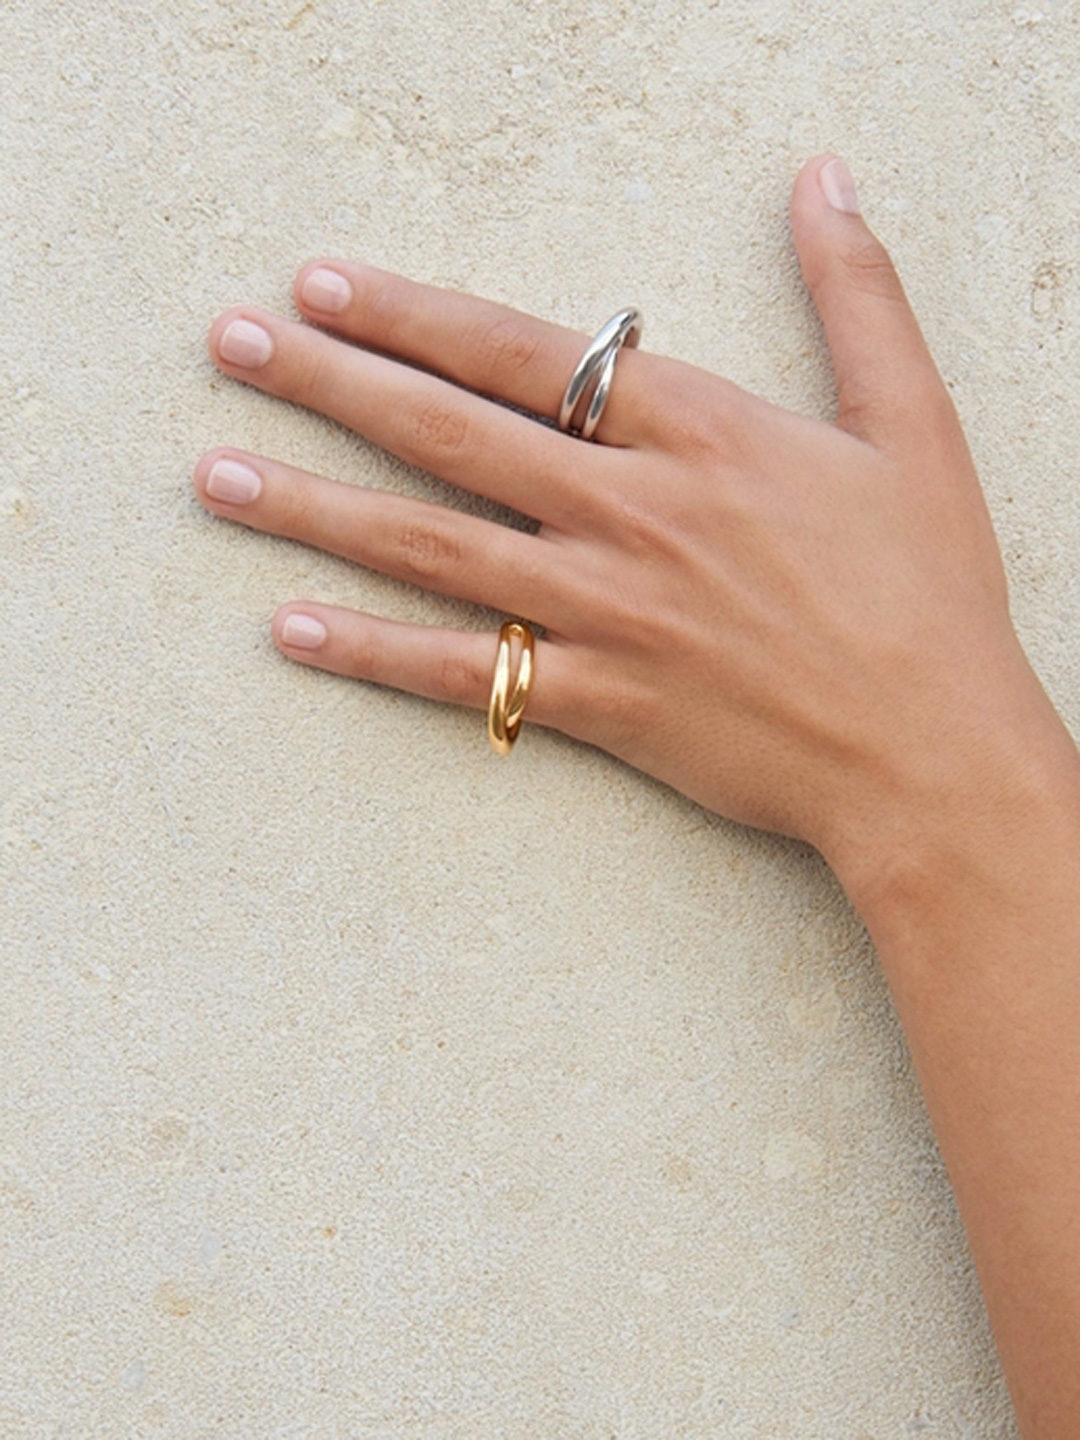 Initial Ring - Yellow Gold